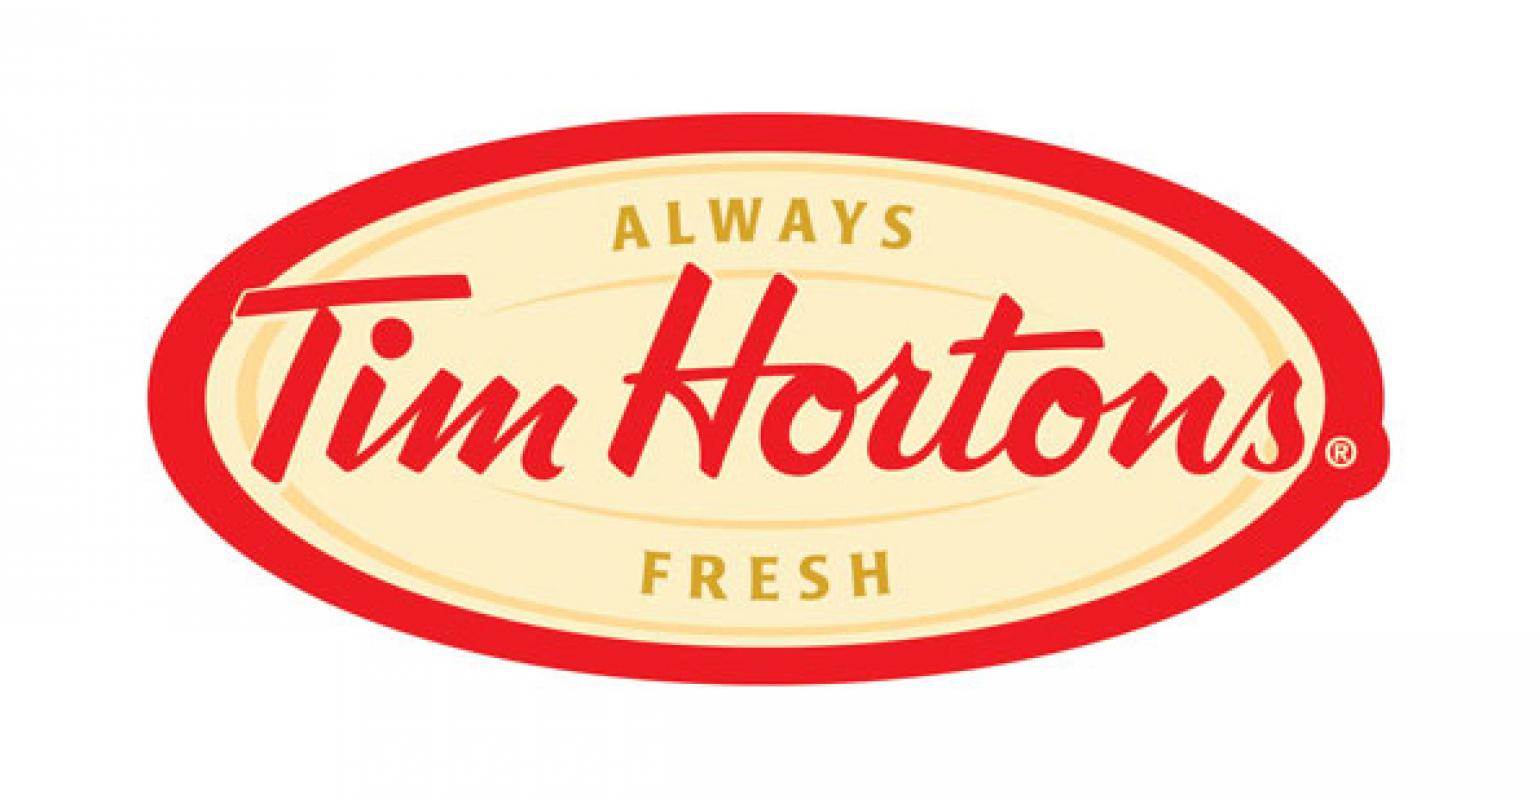 Tim Hortons' parent company appoints new Executive Chairman, CEO